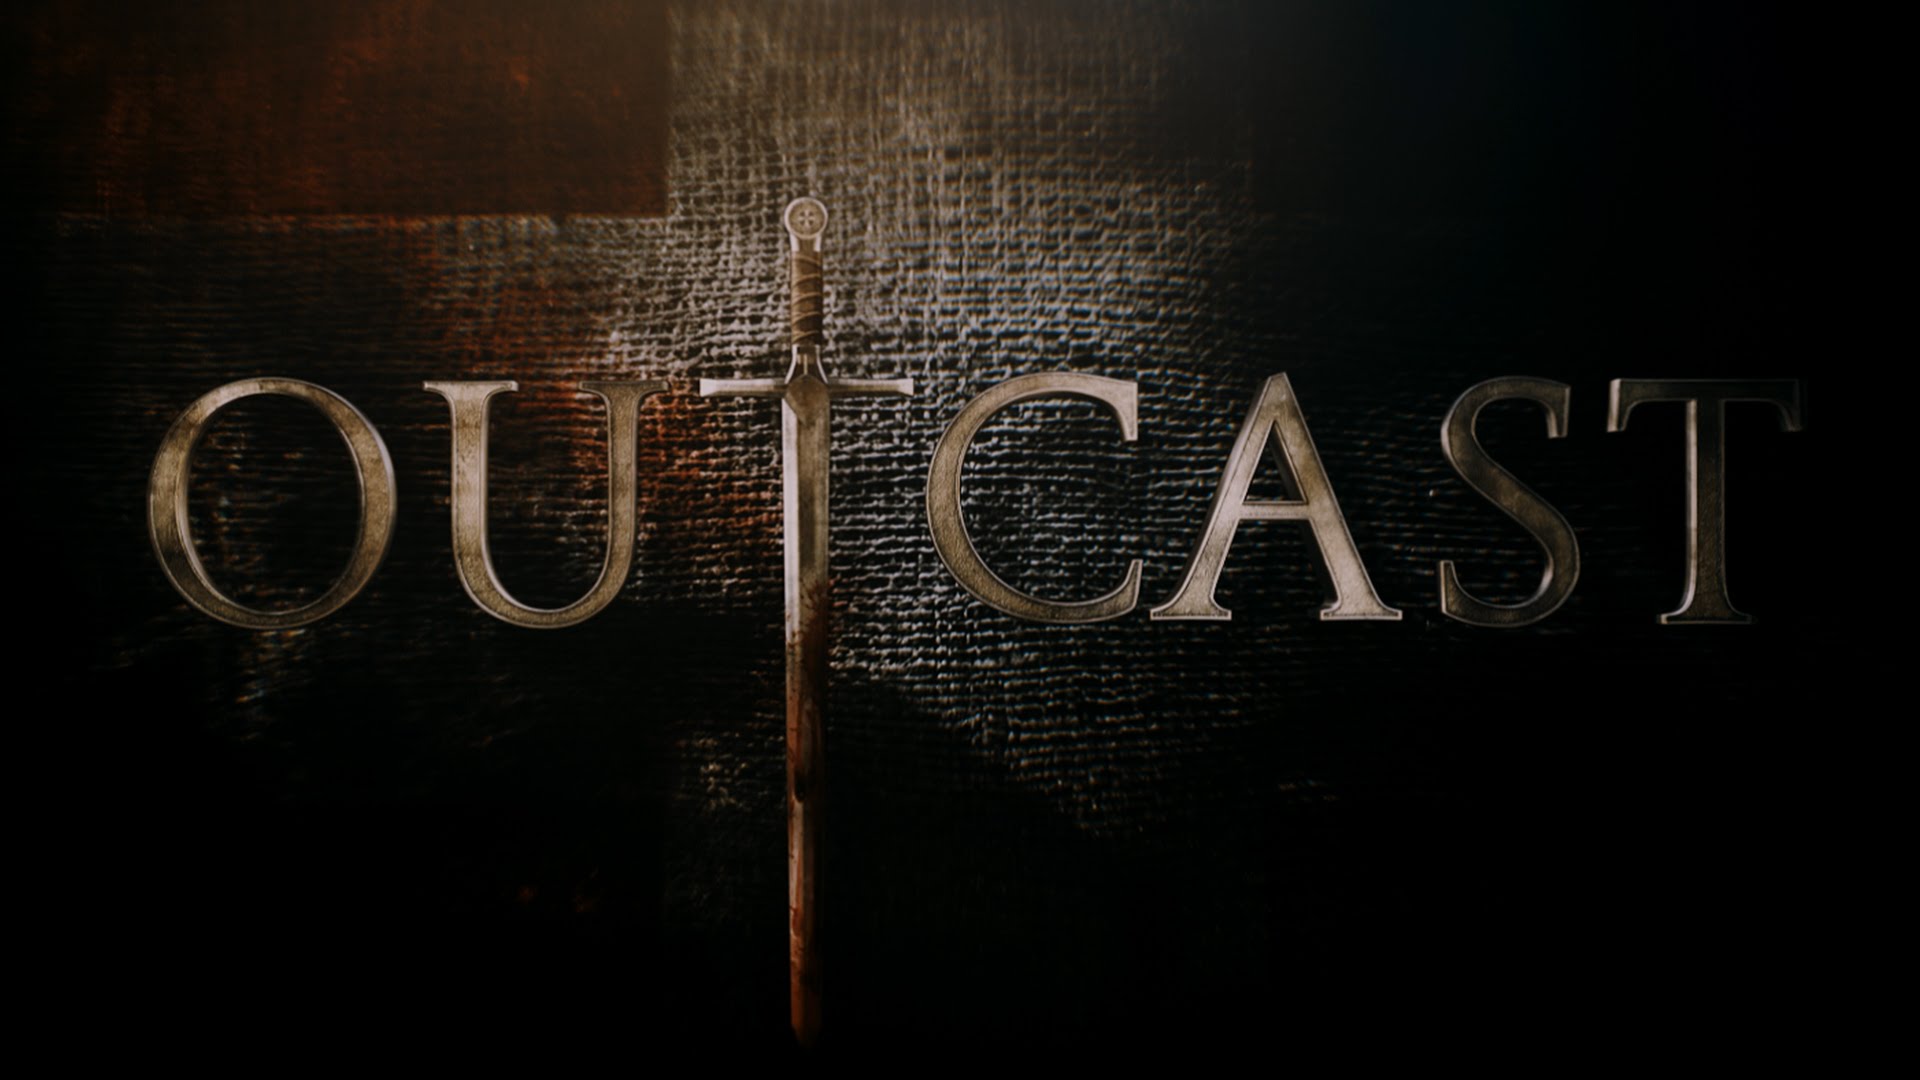 Eh, What’s New On Netflix?: “Outcast”